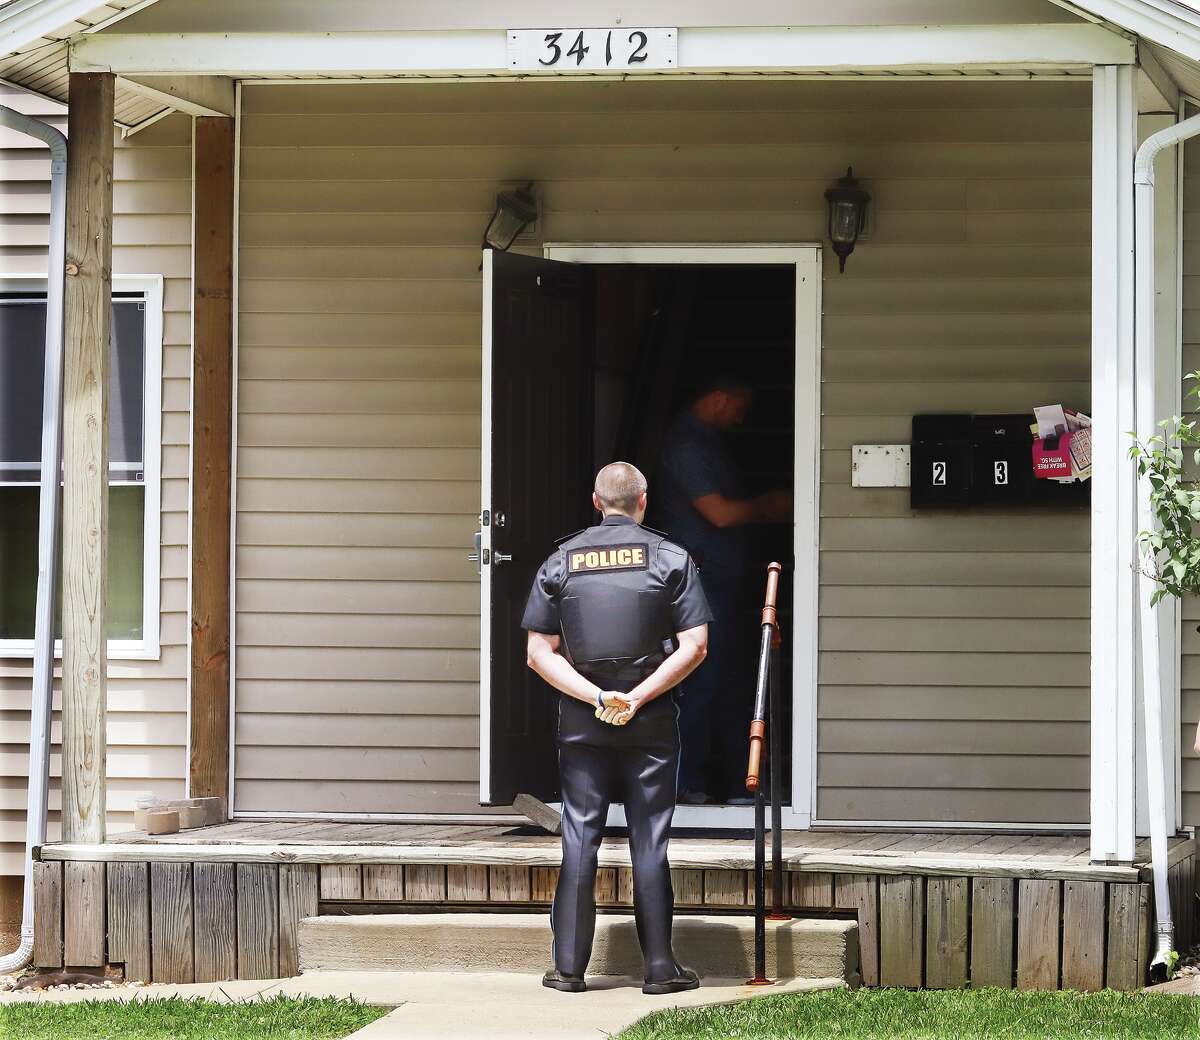 Alton Deputy Police Chief Jarrett Ford stands watch last Thursday over the entrance to the Bolivar Street apartment building where Liese A. Dodd, 22, was found beheaded and eight months pregnant. Police have arrested Deundrea S. Holloway, 22, of Litchfield, and charged him with two counts of first degree murder and two counts of intentional homicide of an unborn child. Dodd had an expected delivery date of mid-July. Holloway is in custody at the Alton Police Department.